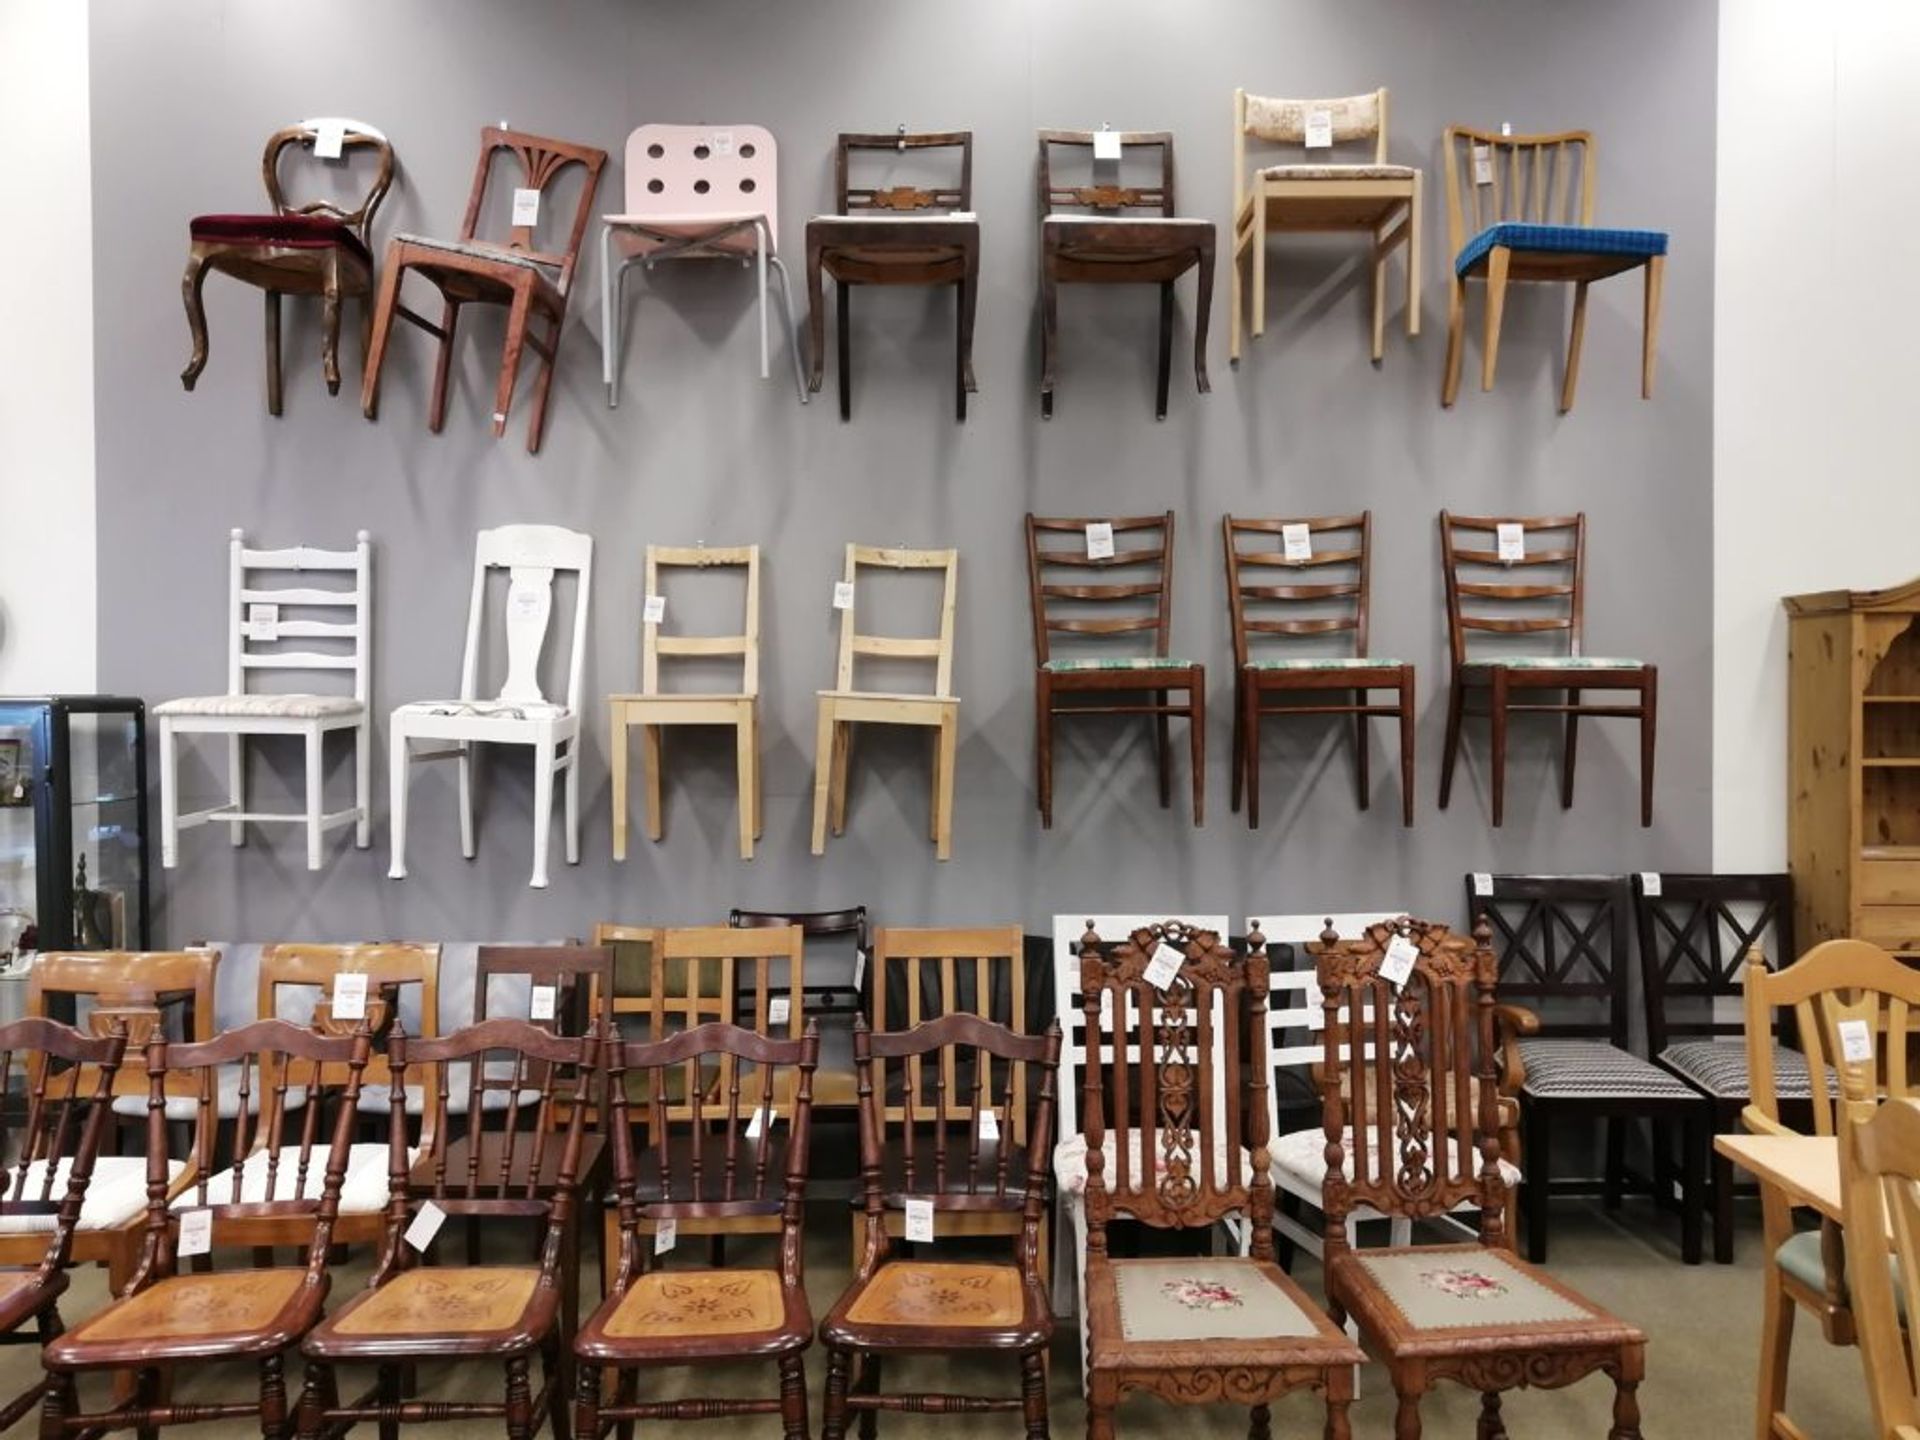 Rows of wooden chairs against a wall.